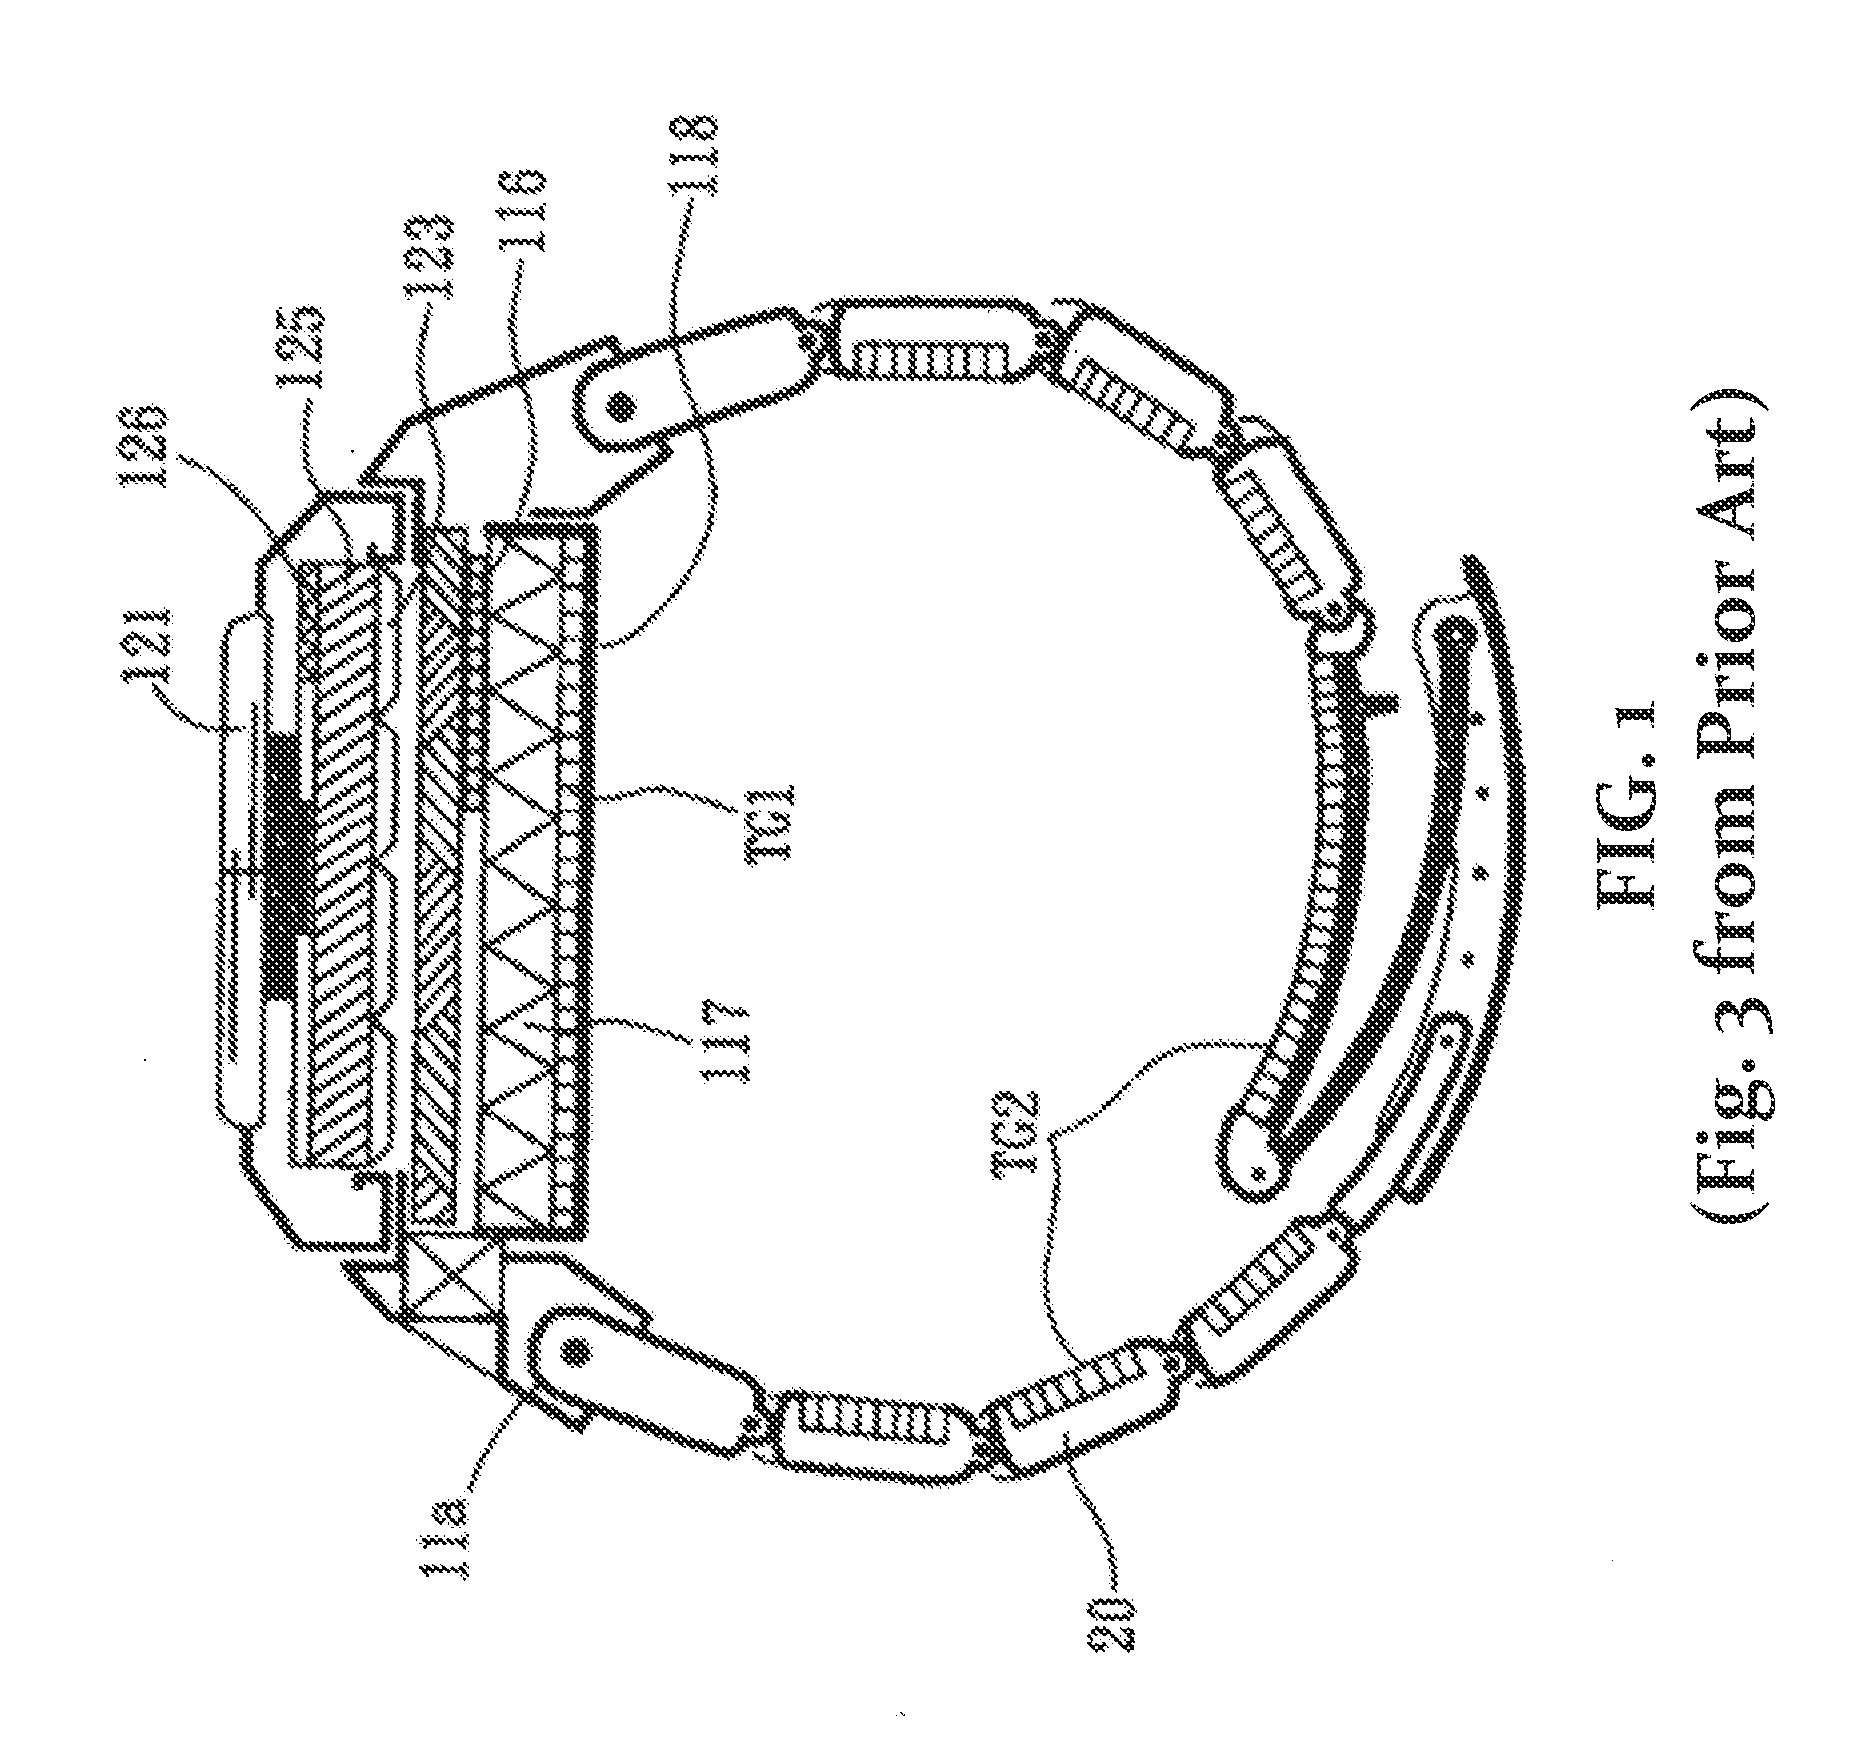 Flexible band or strap with integrated battery